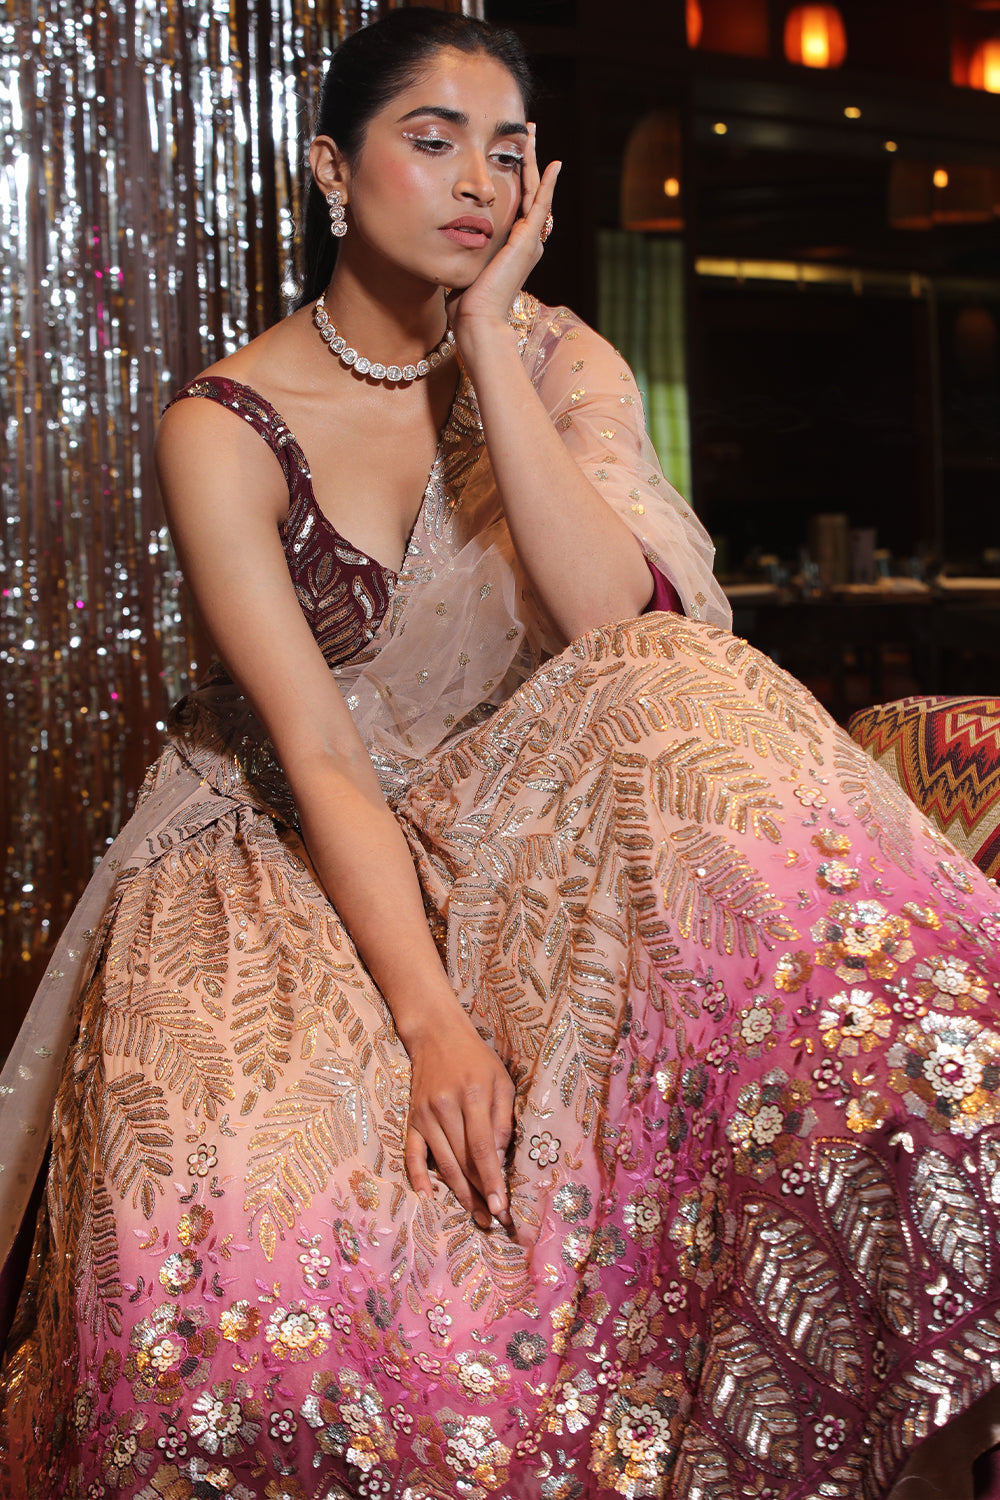 Beige and Wine Ombre Color Georgette Lehenga